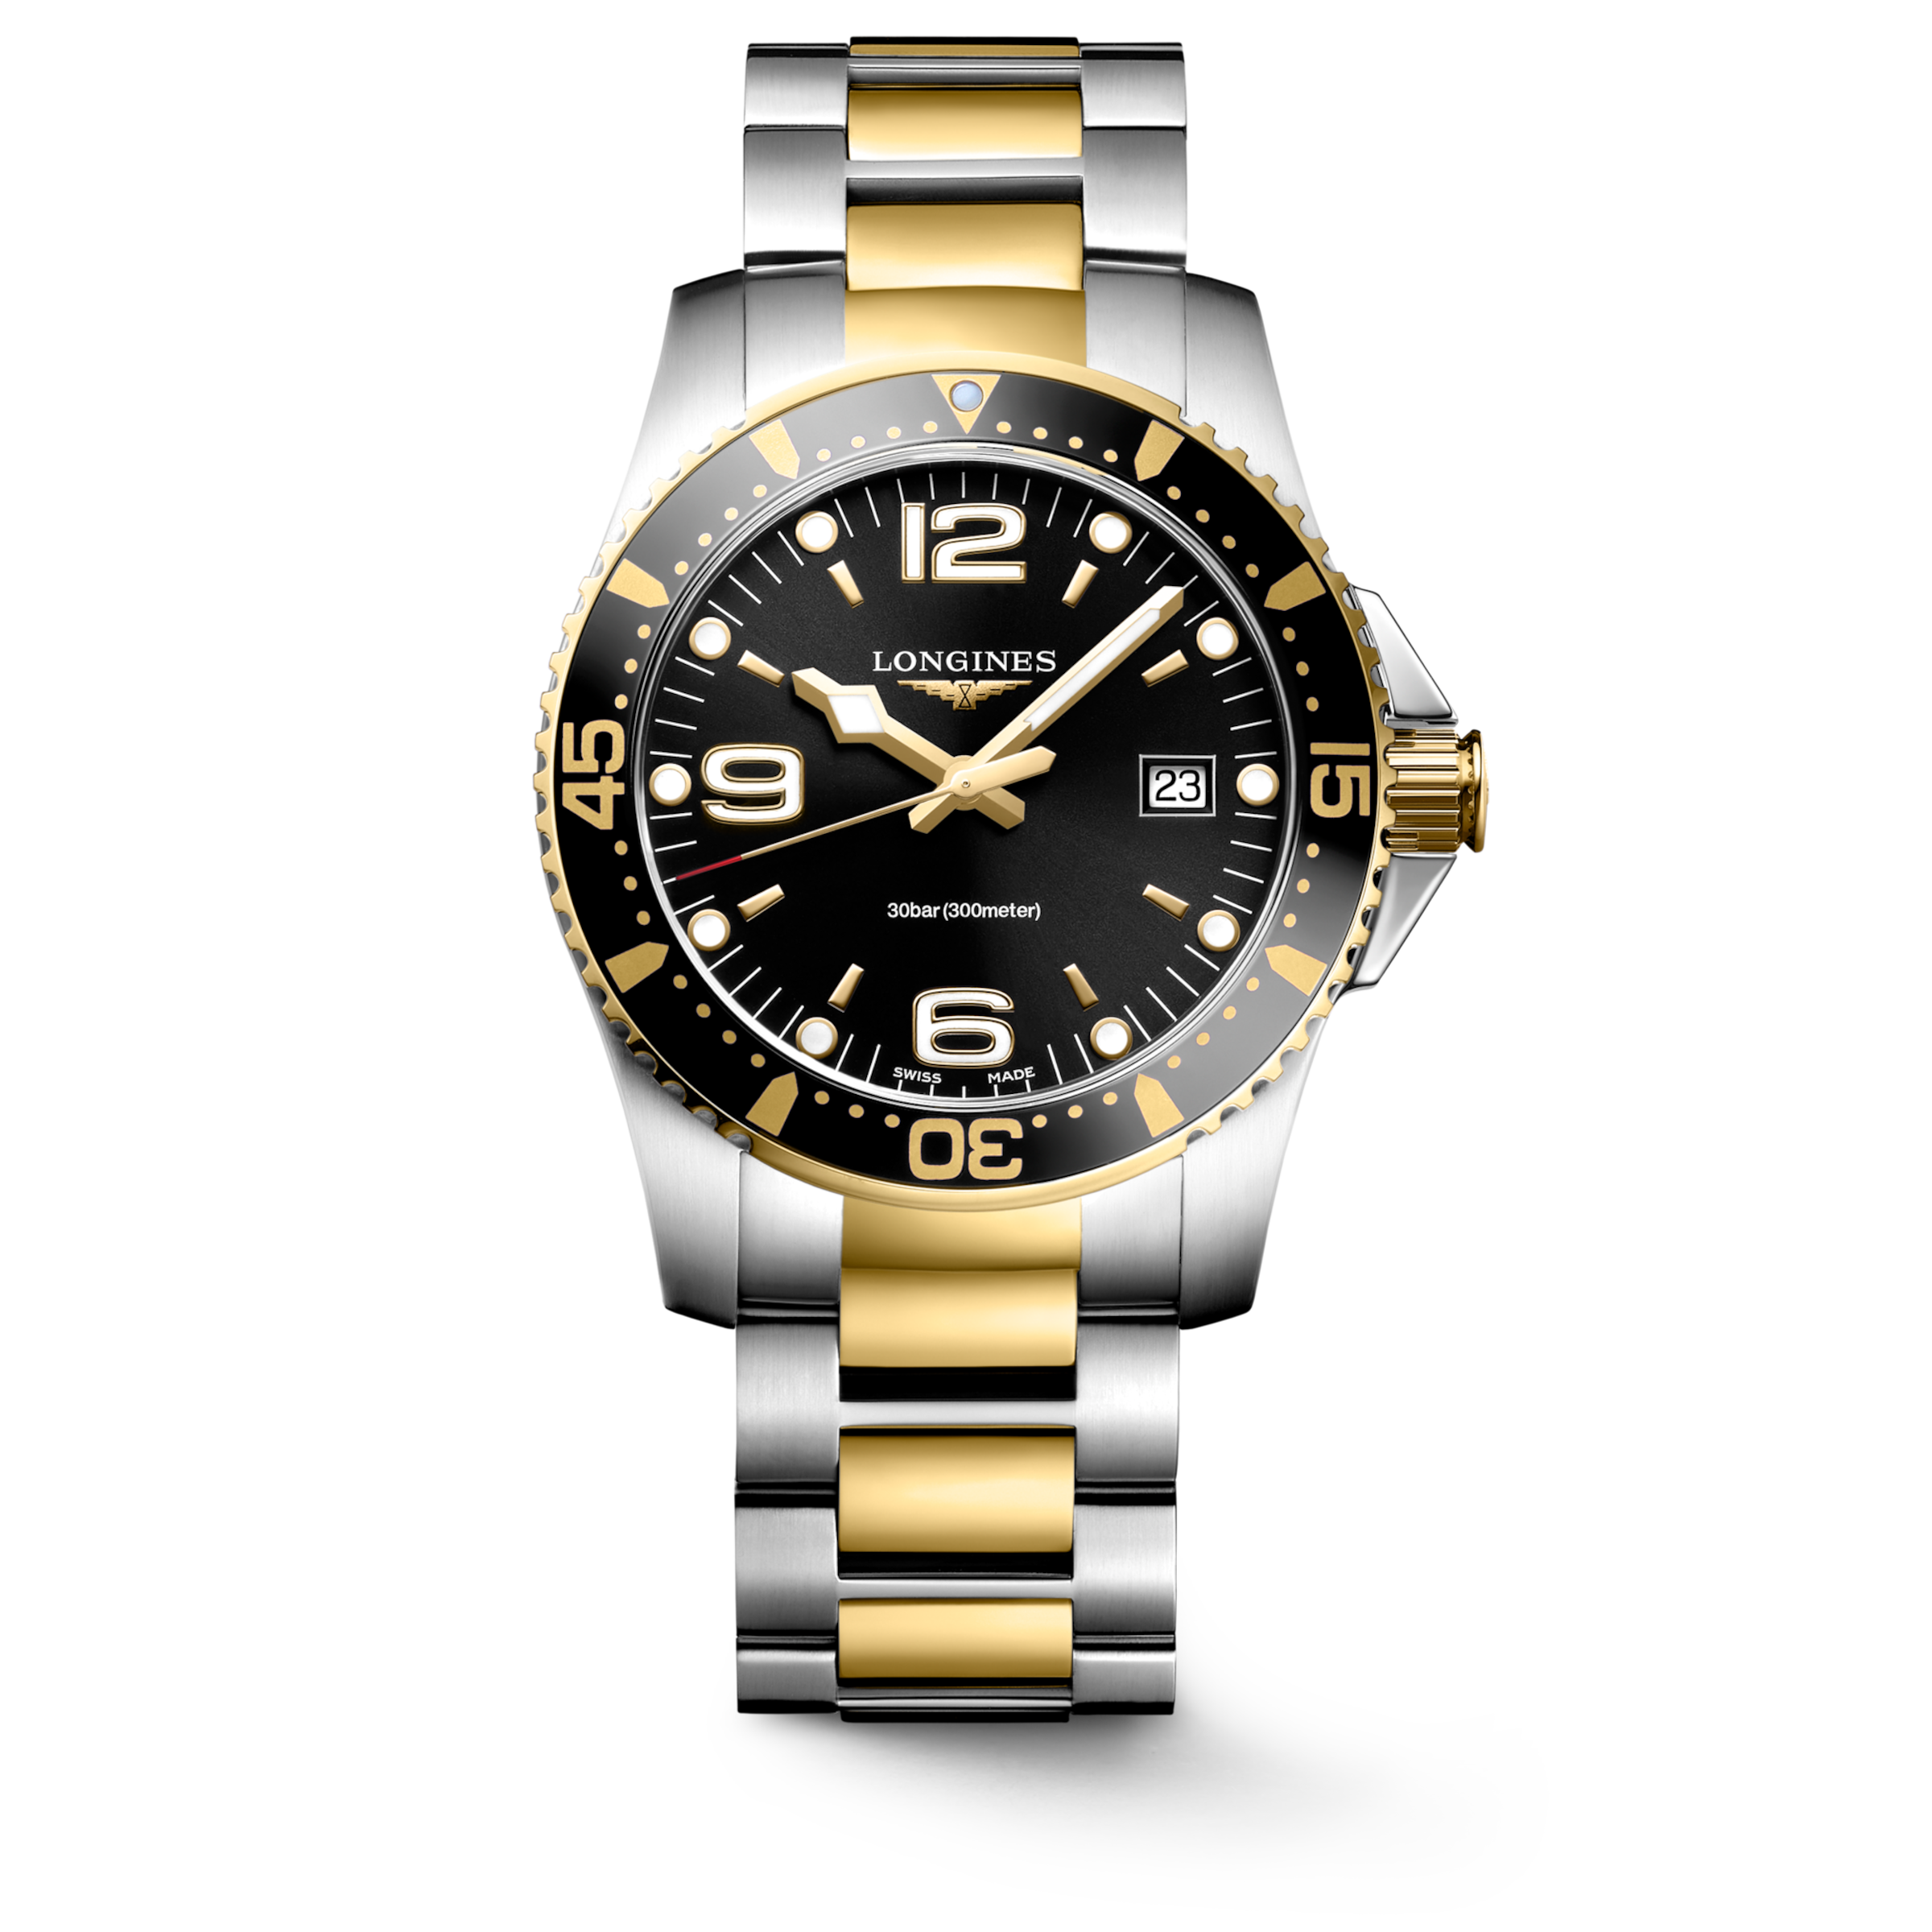 Longines HYDROCONQUEST Quartz Stainless steel and yellow PVD coating Watch - L3.740.3.56.7